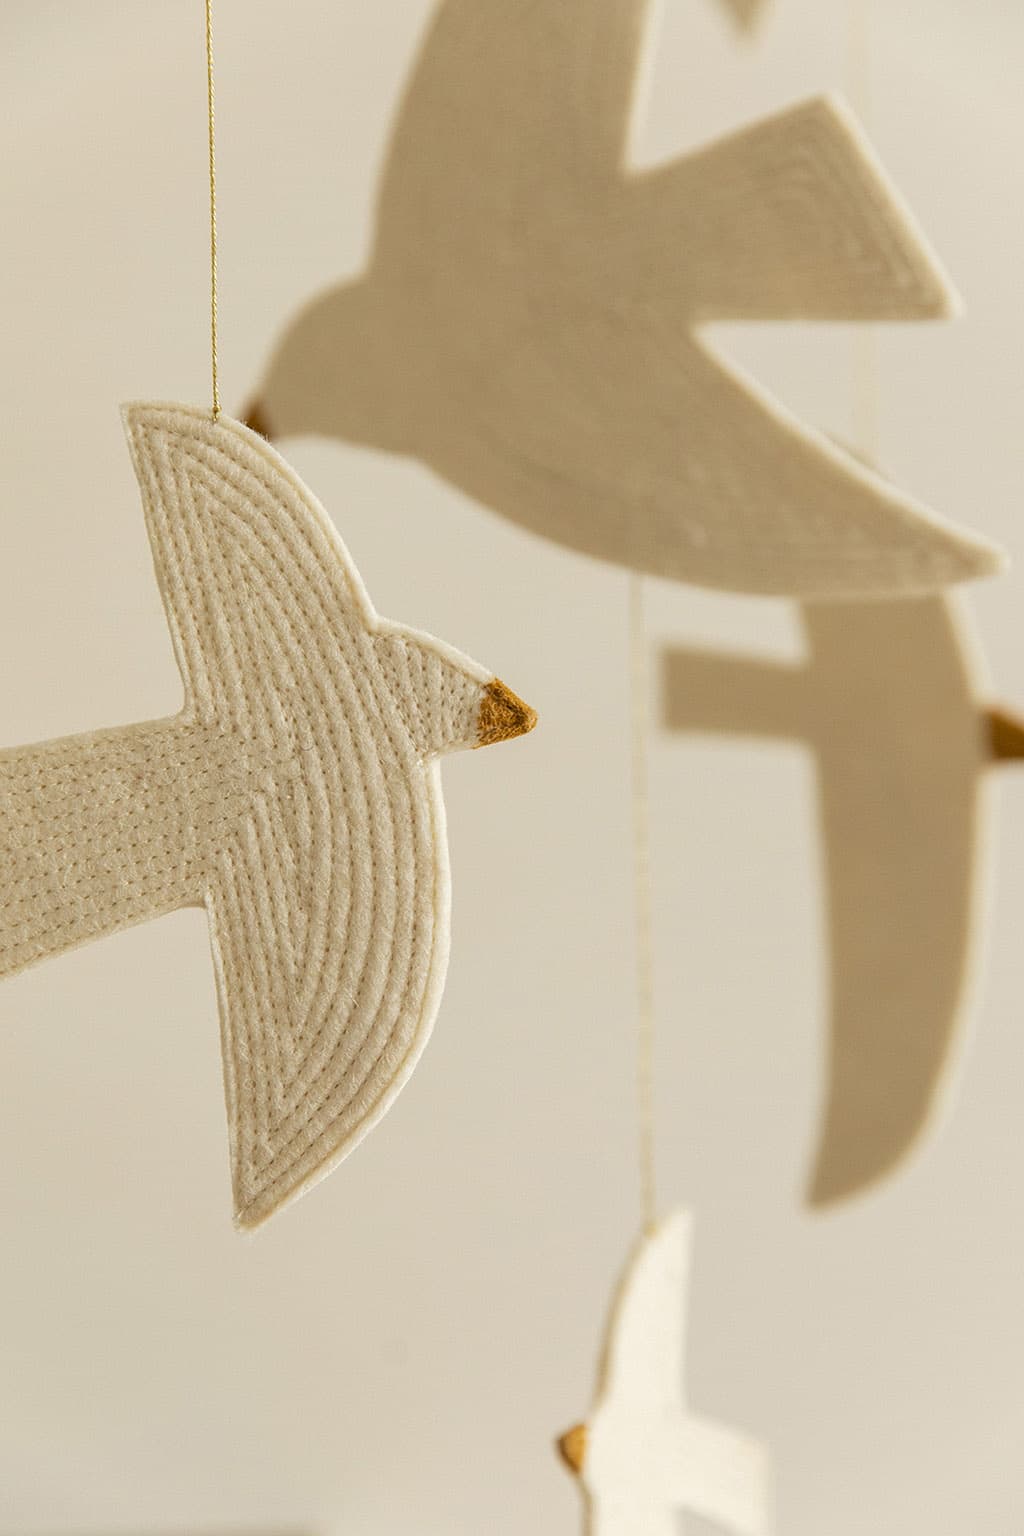 Felt and bamboo bird mobile for poetic decoration